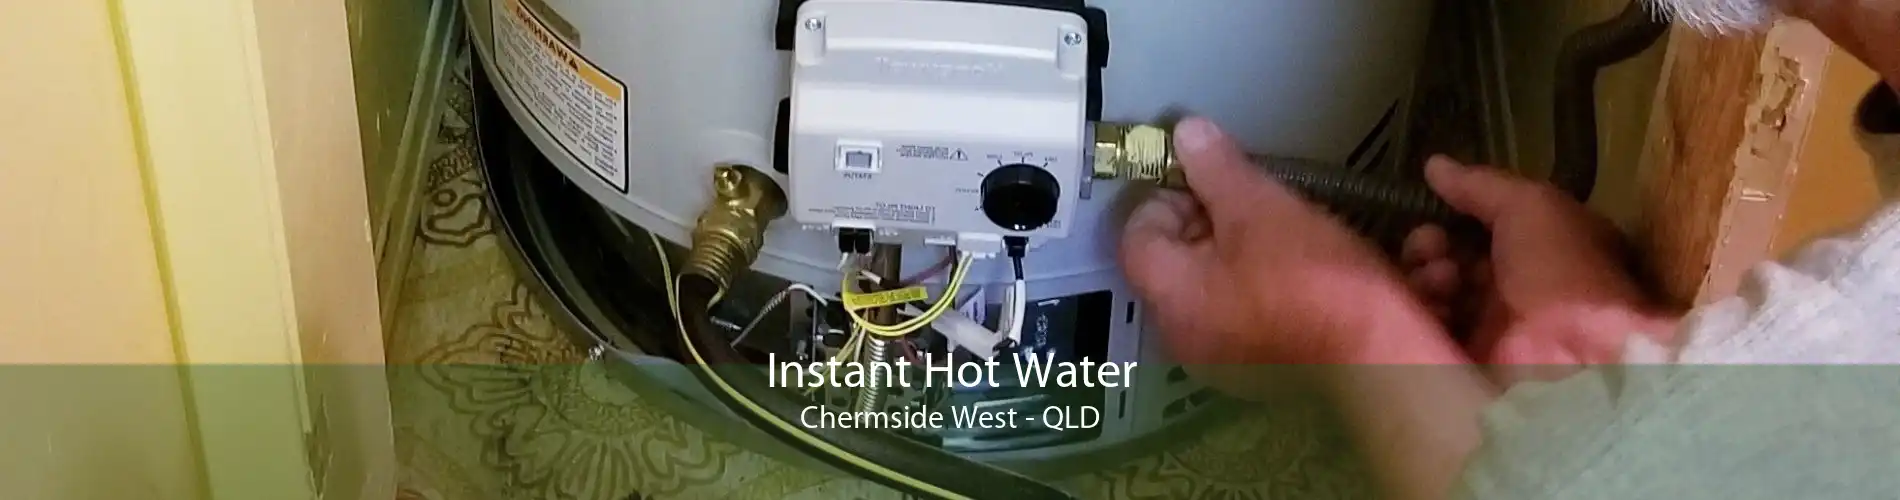 Instant Hot Water Chermside West - QLD